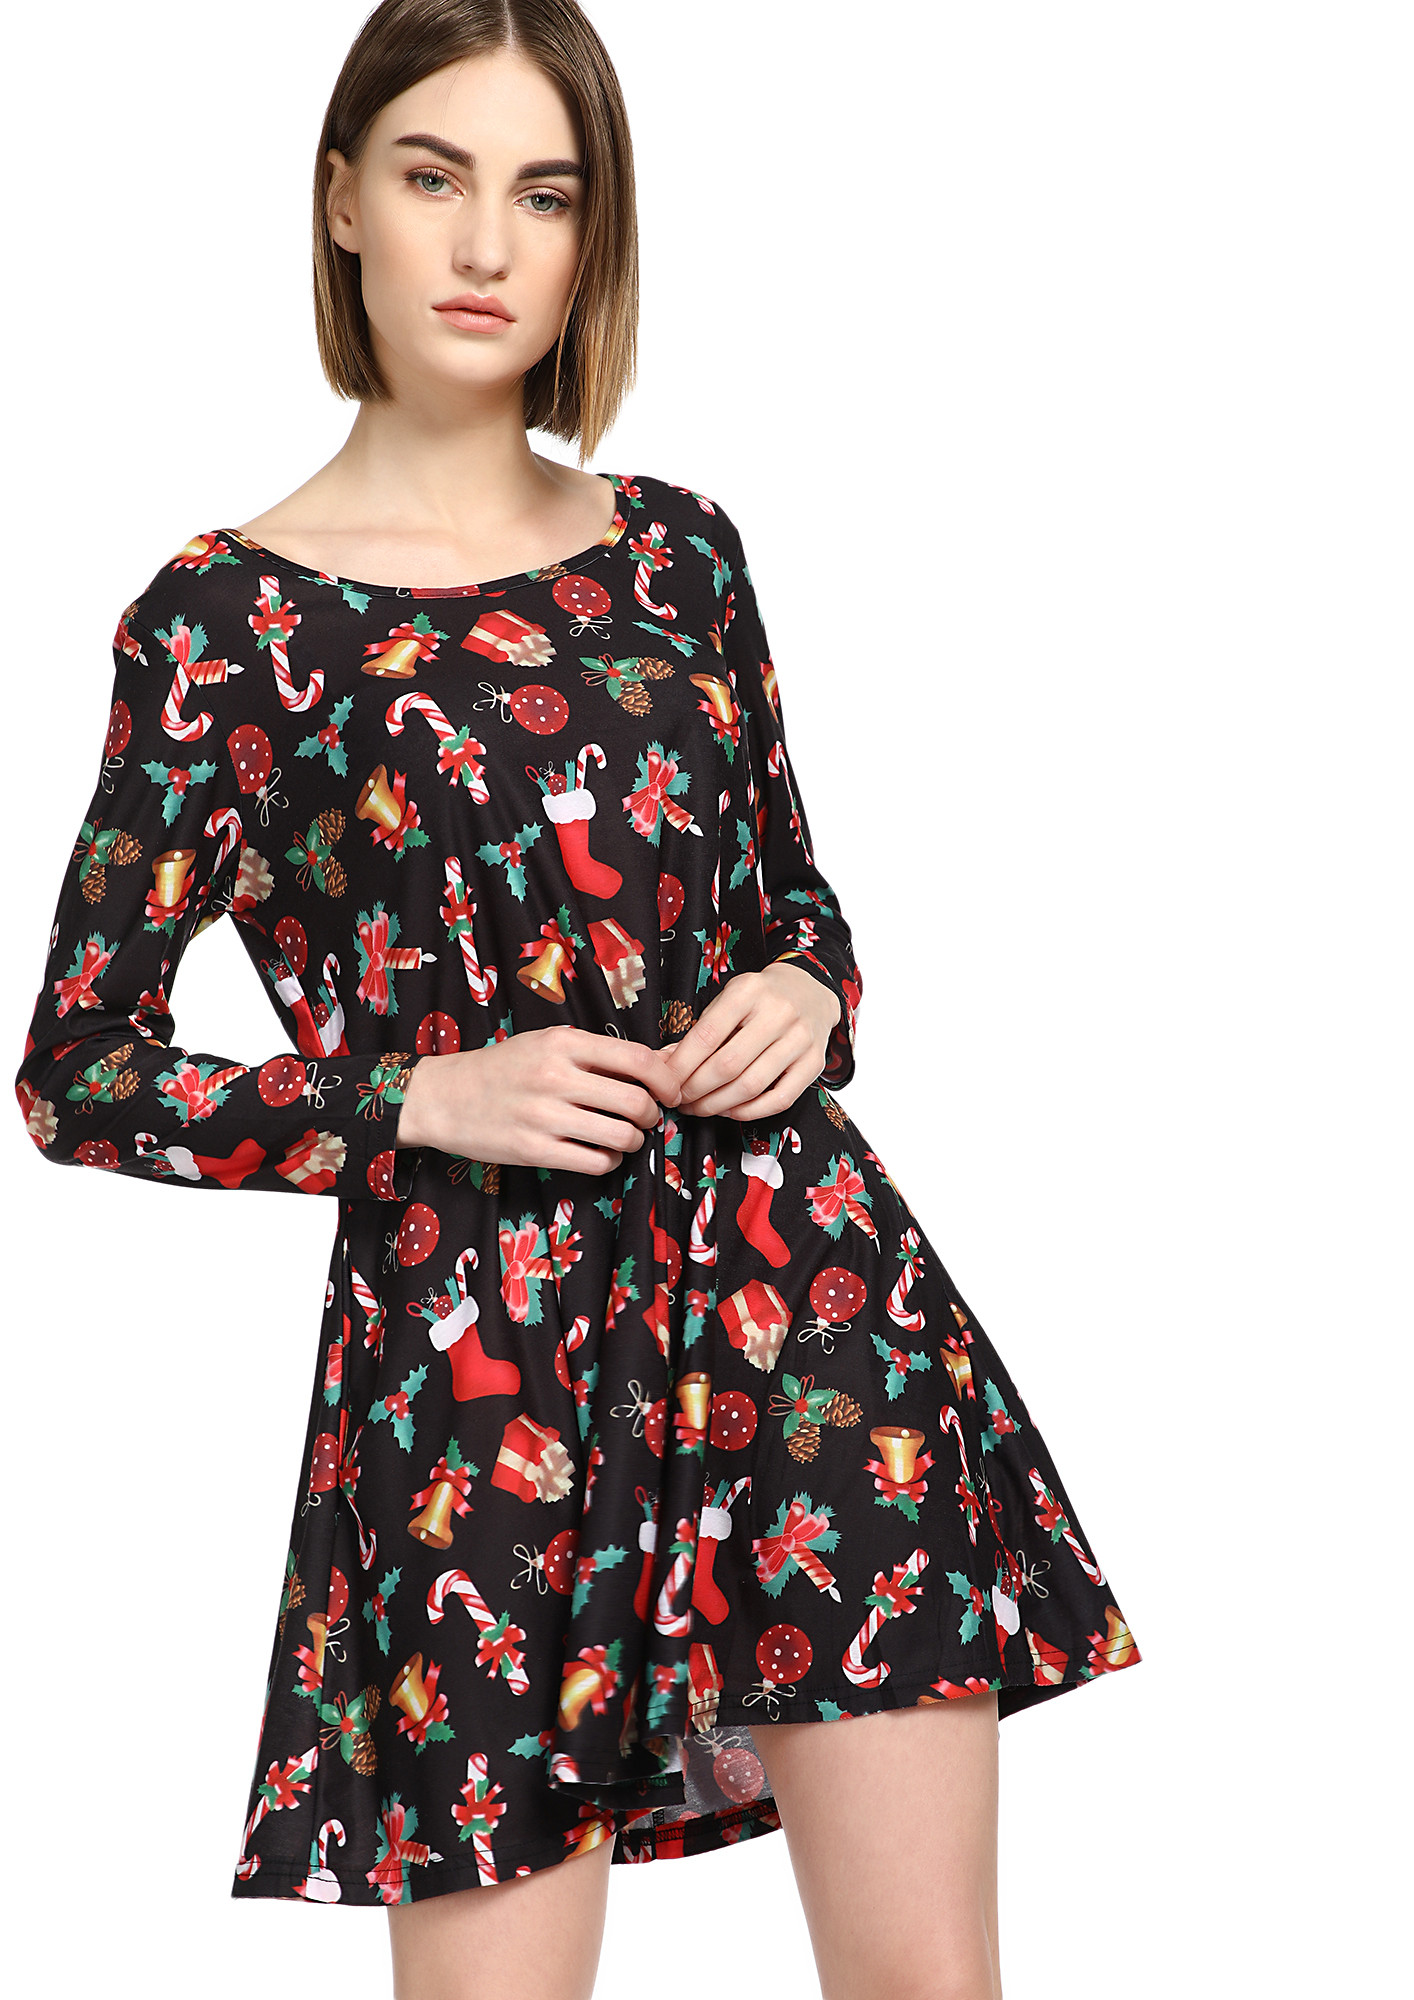 MY FLOWER IN NEED RED SHIFT DRESS